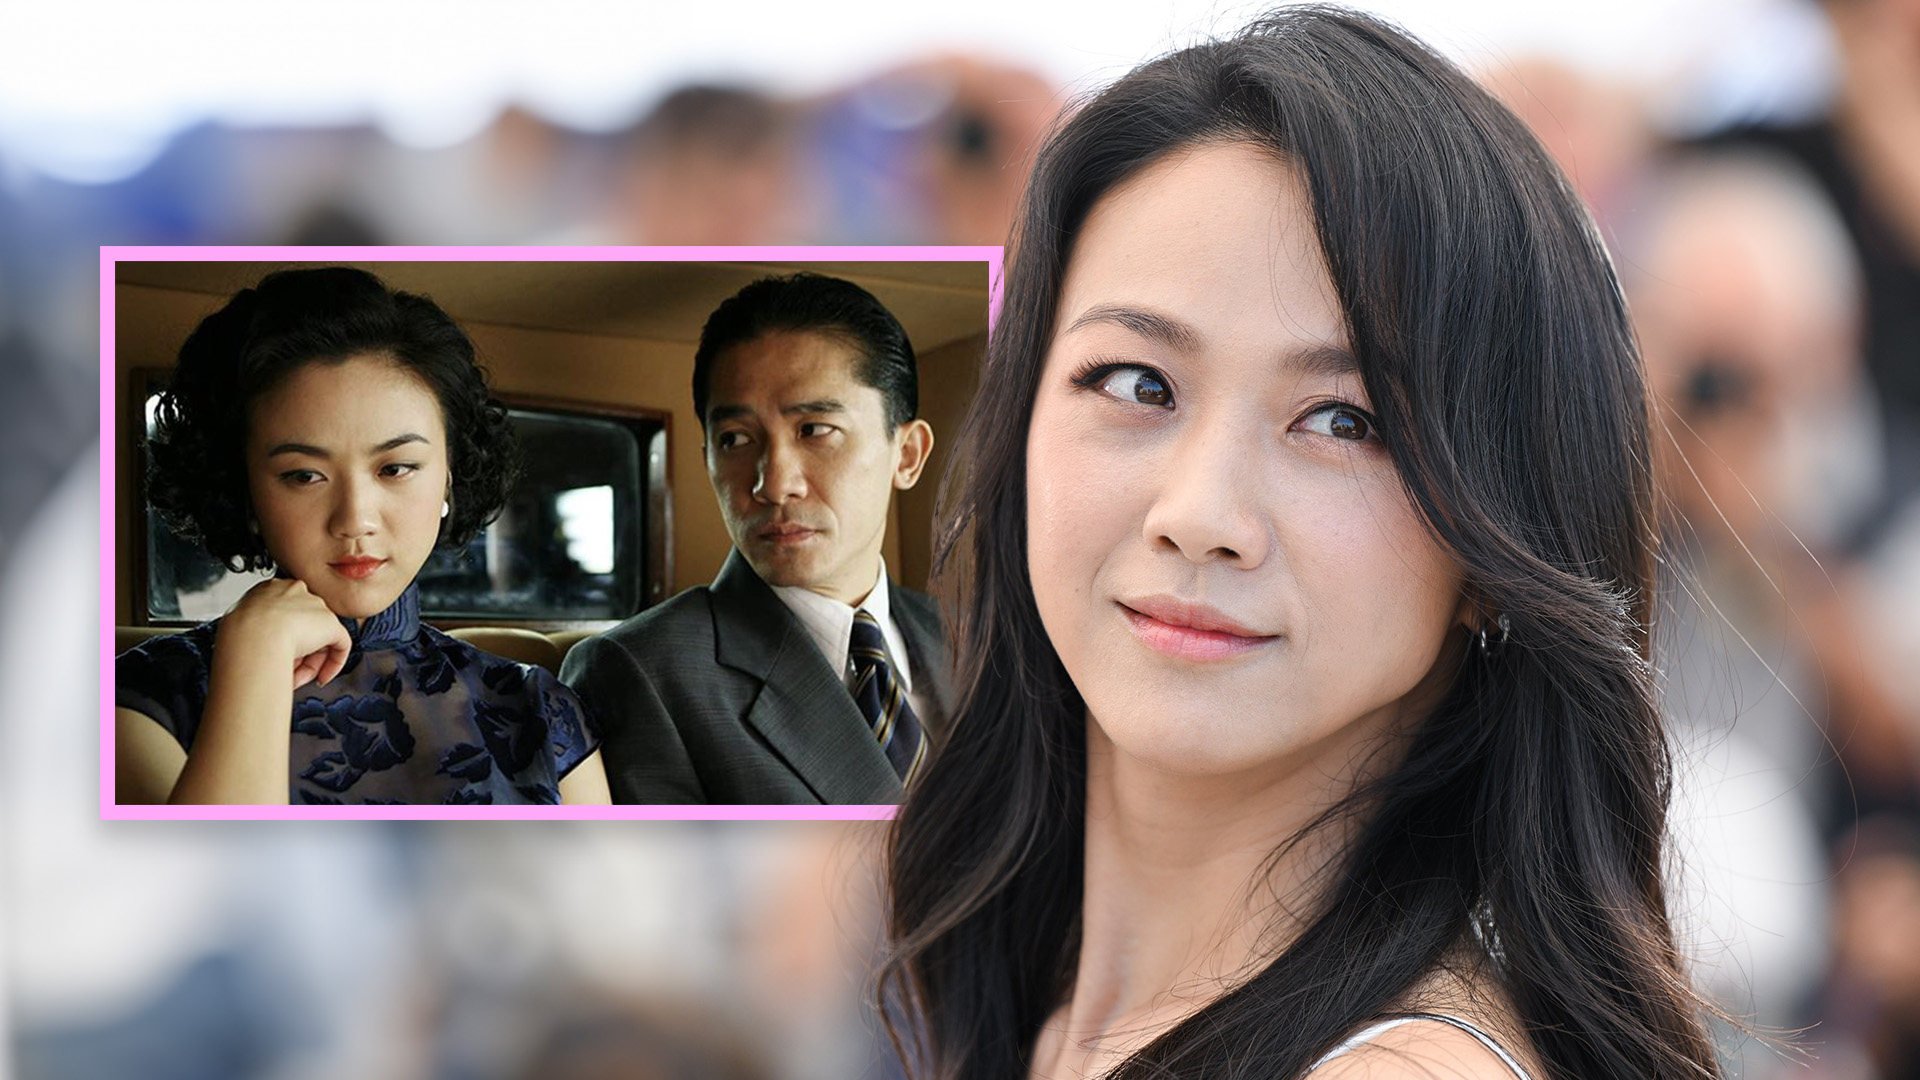 Chinese actress Tang Wei achieved international fame with her captivating performance in “Lust, Caution”, opted for a brief hiatus to pursue studies in the UK. Photo: SCMP composite/IMDb/Getty Images